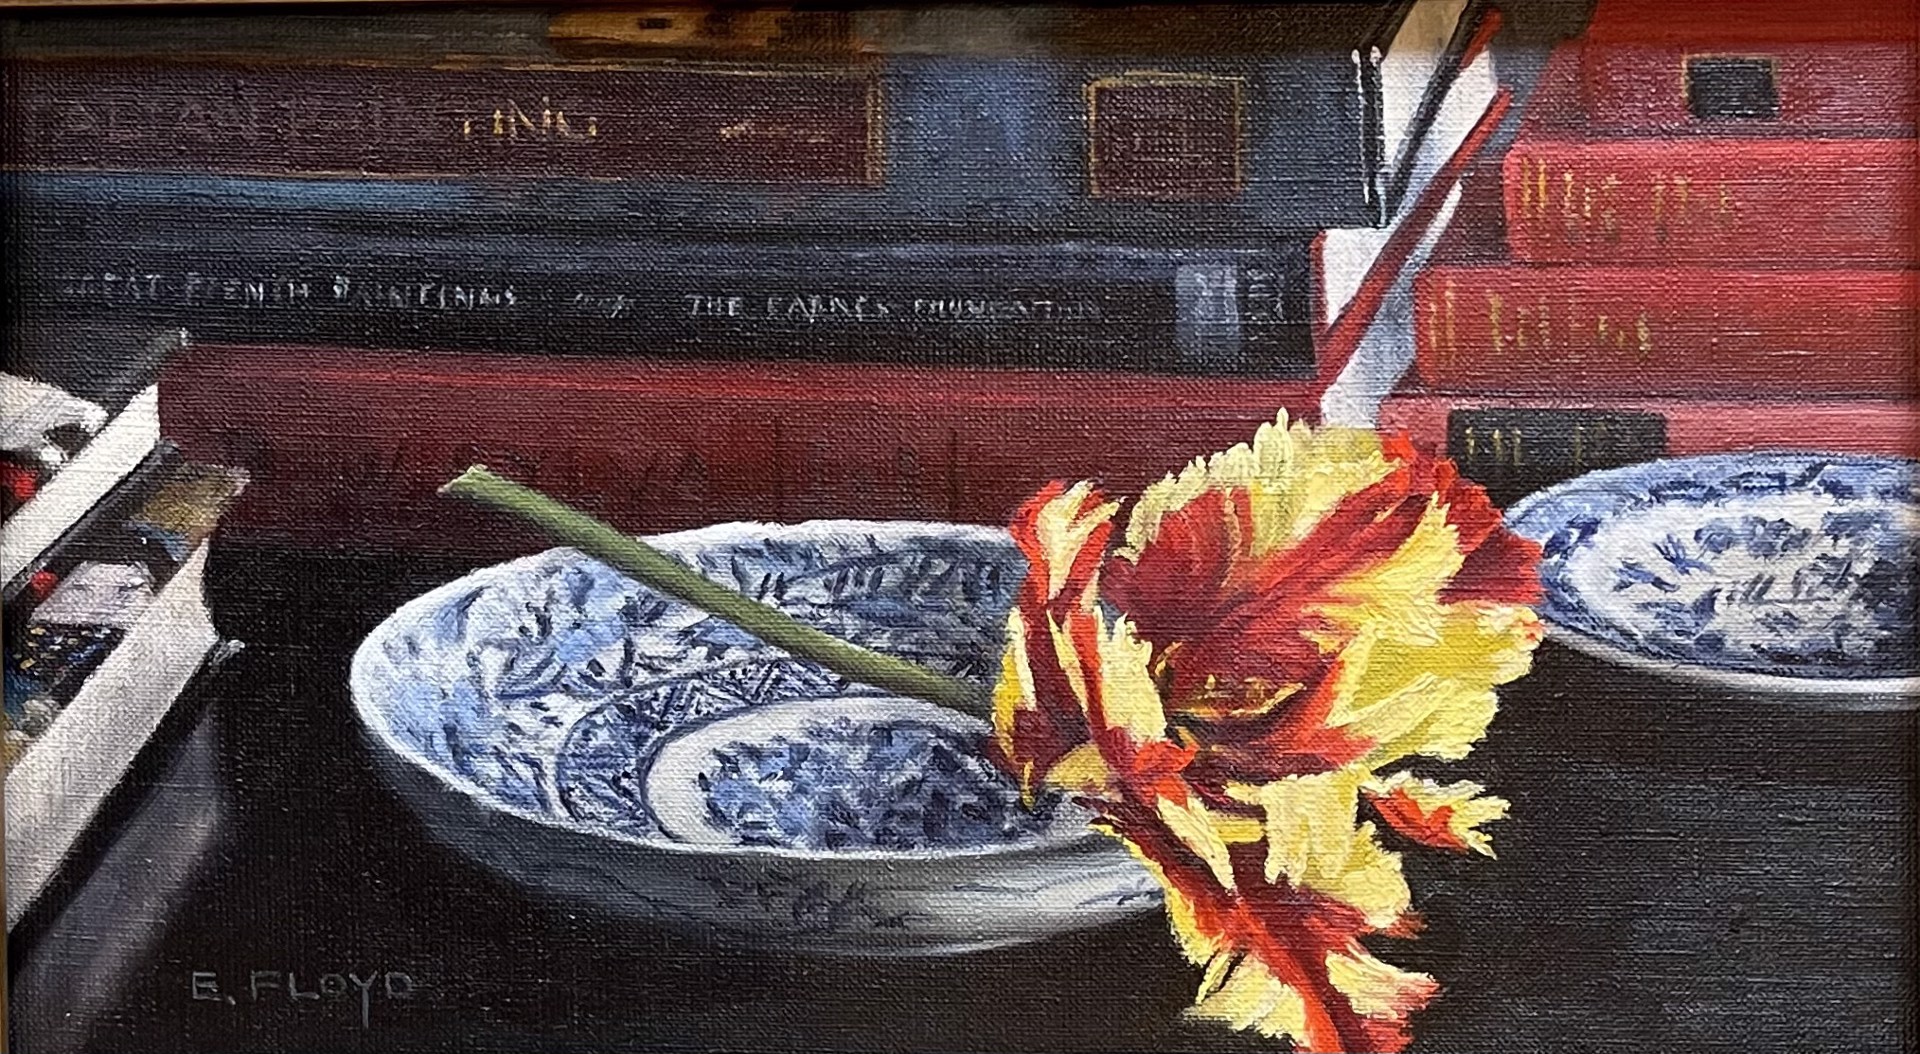 Flaming Parrot Tulip with Porcelain & Books by Elizabeth Floyd